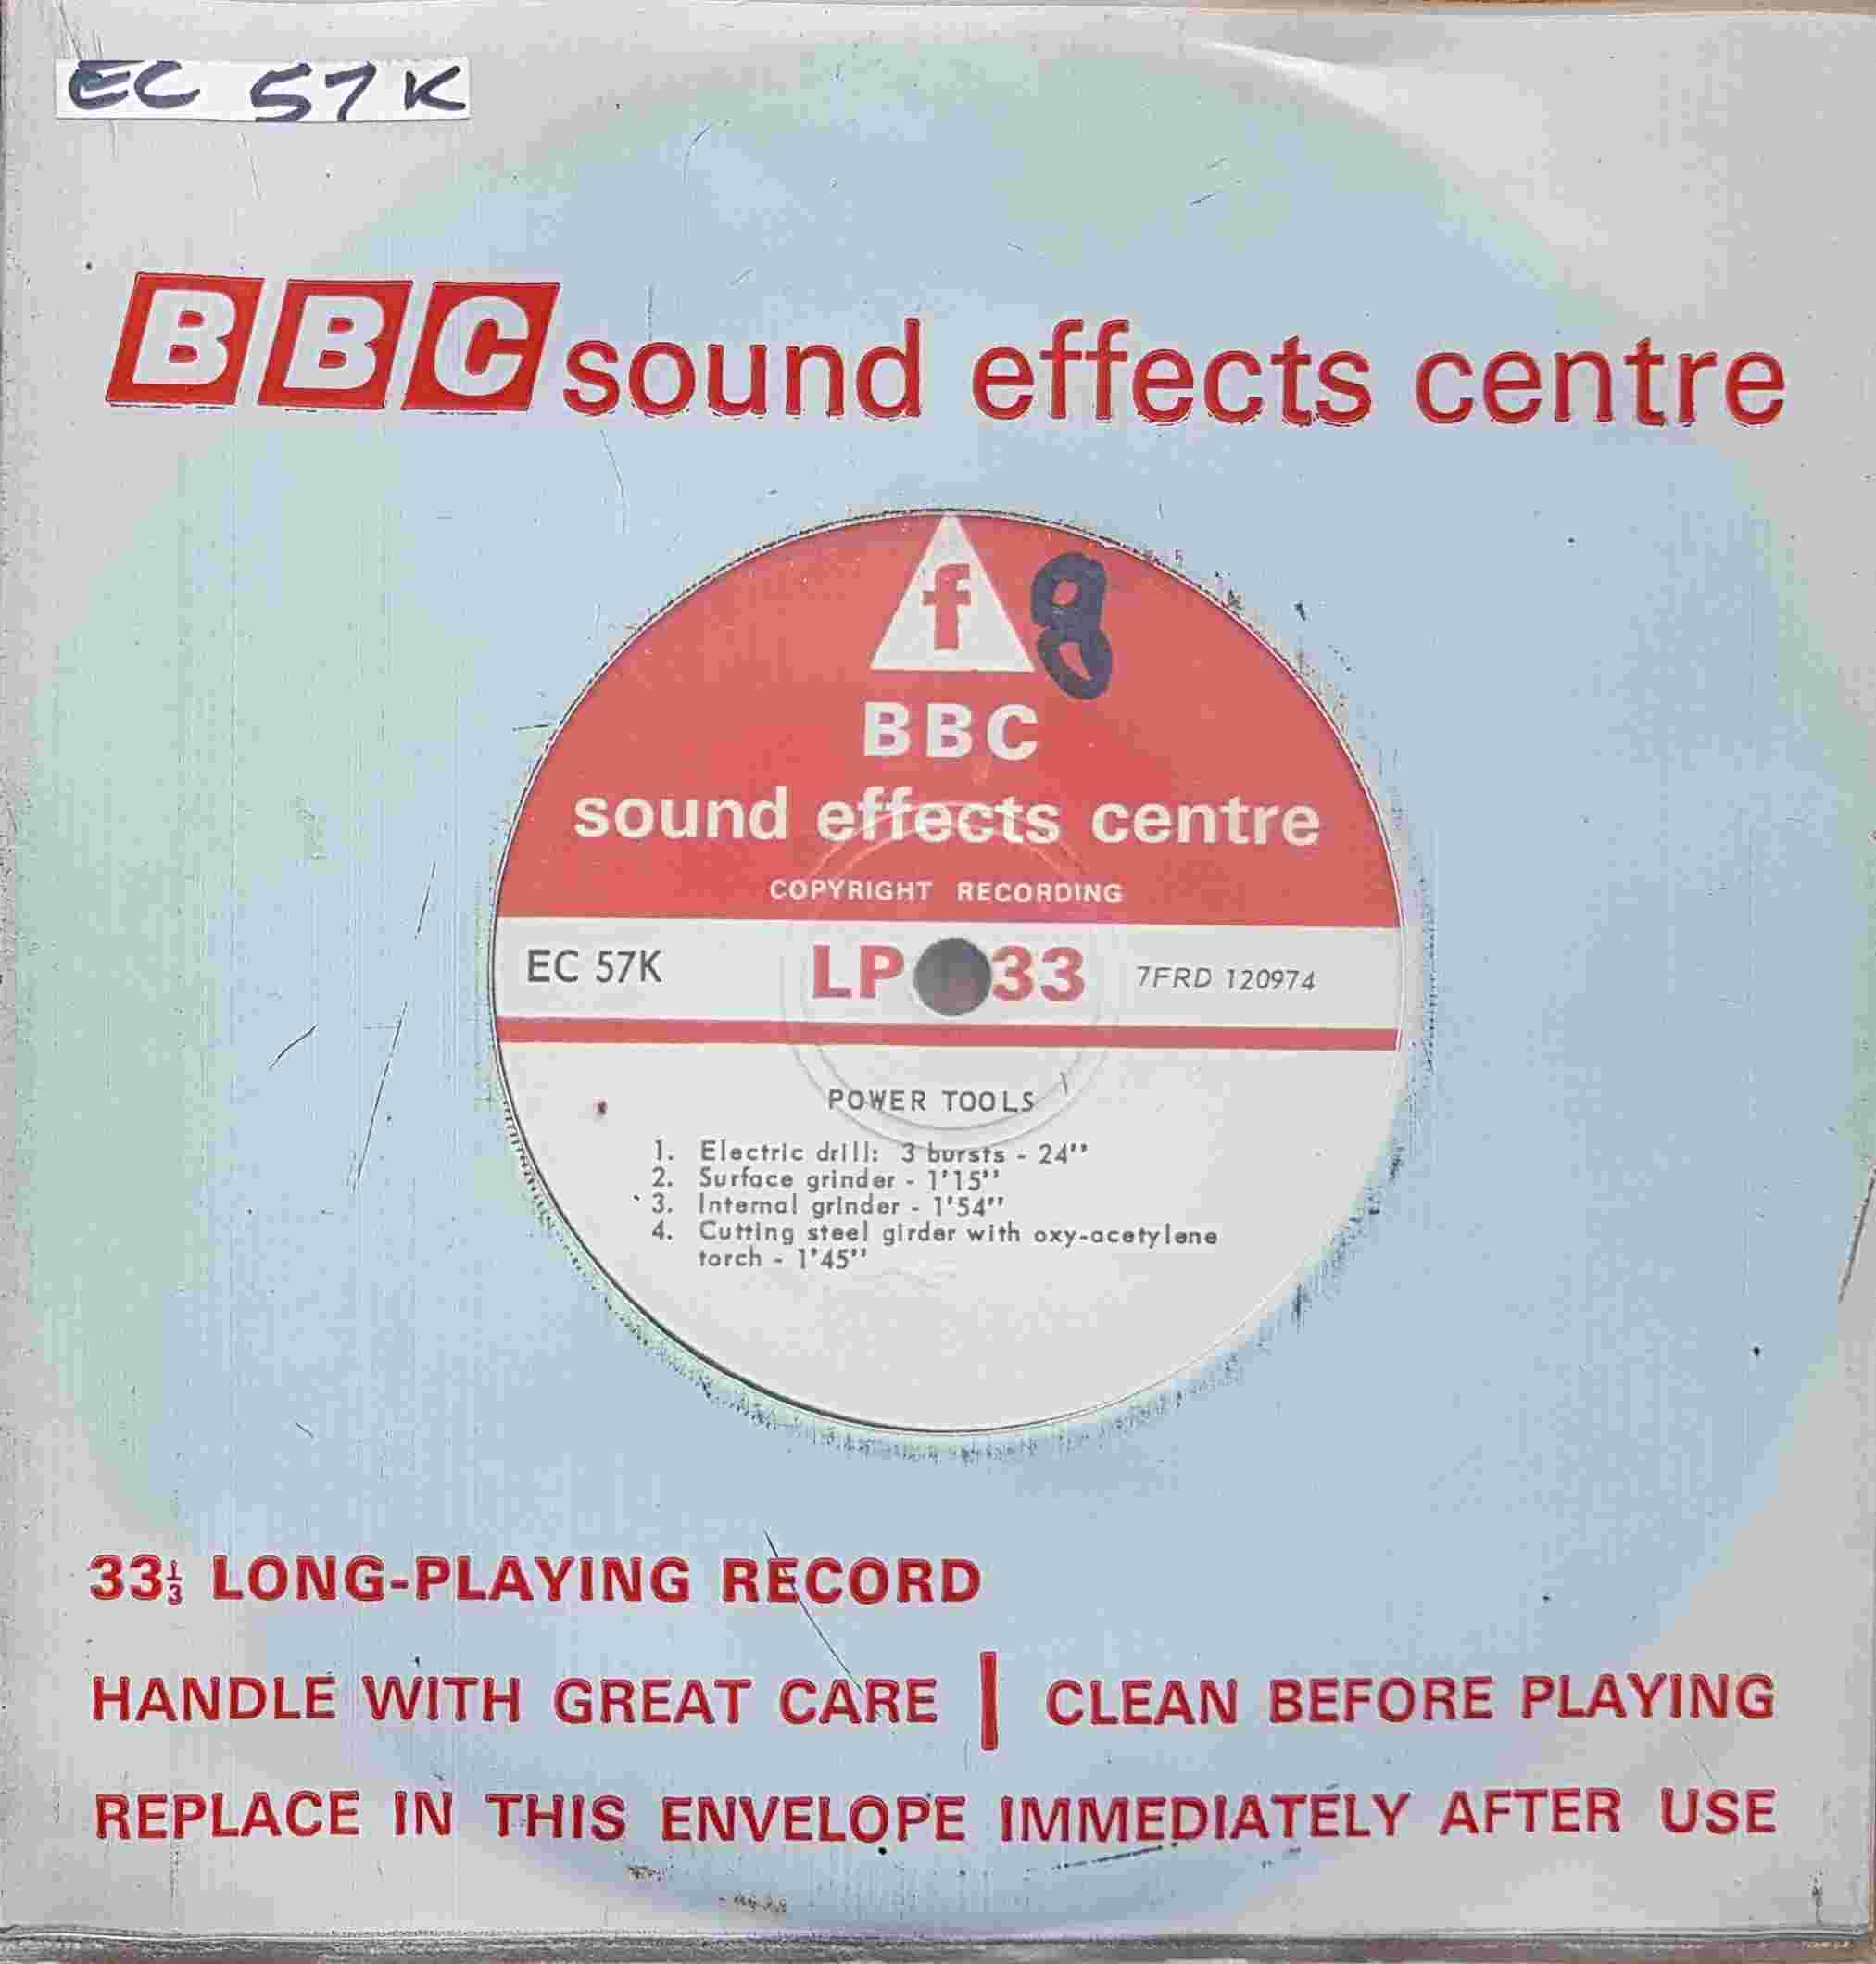 Picture of EC 57K Power tools / Industry by artist Not registered from the BBC singles - Records and Tapes library